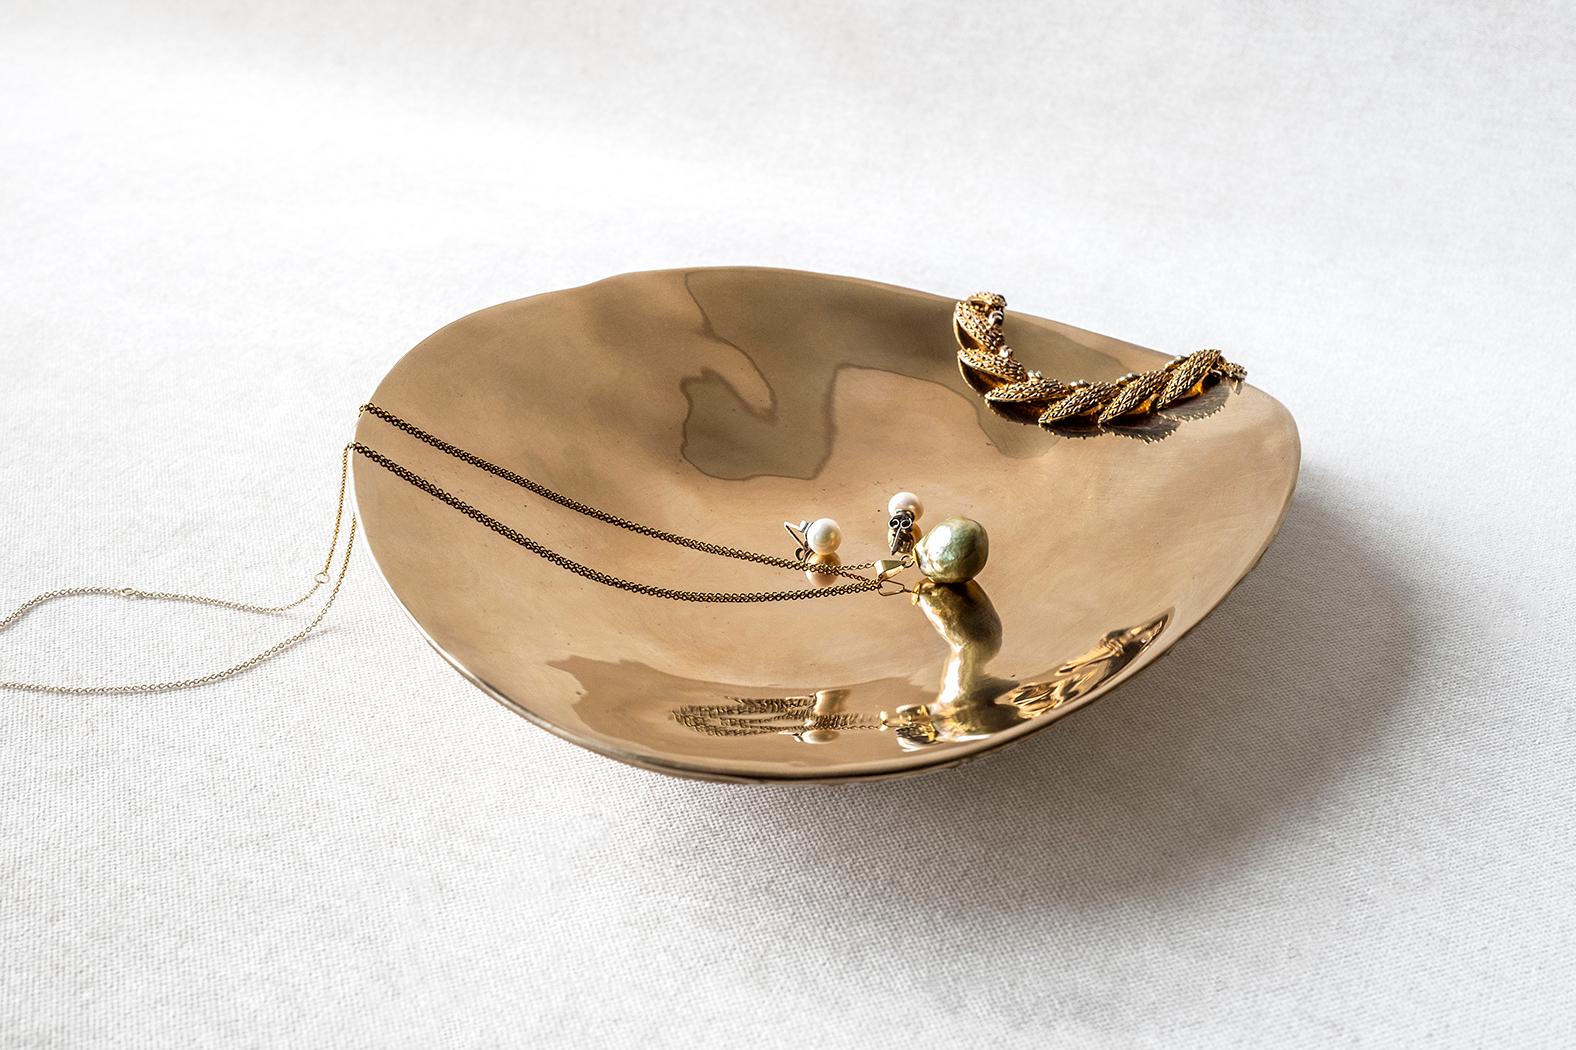 This stunning solid bronze dish is an interior embellishment.
The organic shape is sculpted by hand and polished after casting for a smooth shiny surface.
Inspired by the perfectly imperfect shapes in nature, this home accessory will add a touch